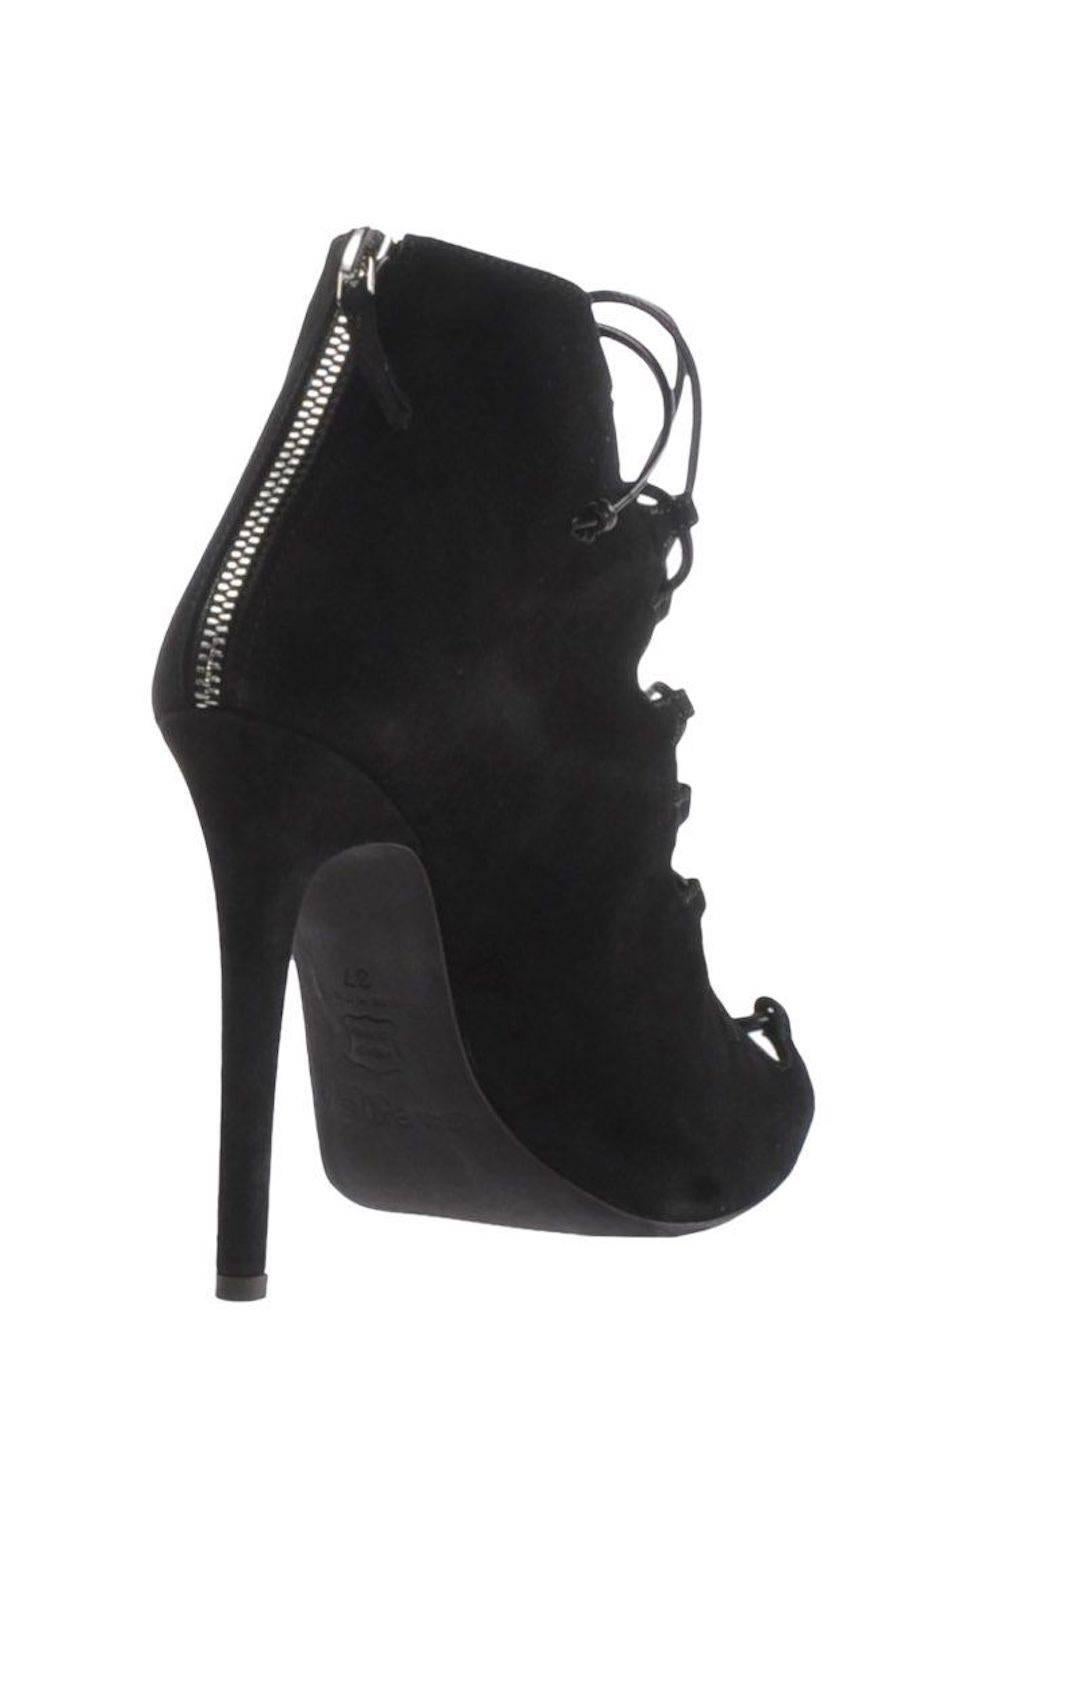 Women's Giambattista Valli NEW & SOLD OUT Black Ankle Booties in Box